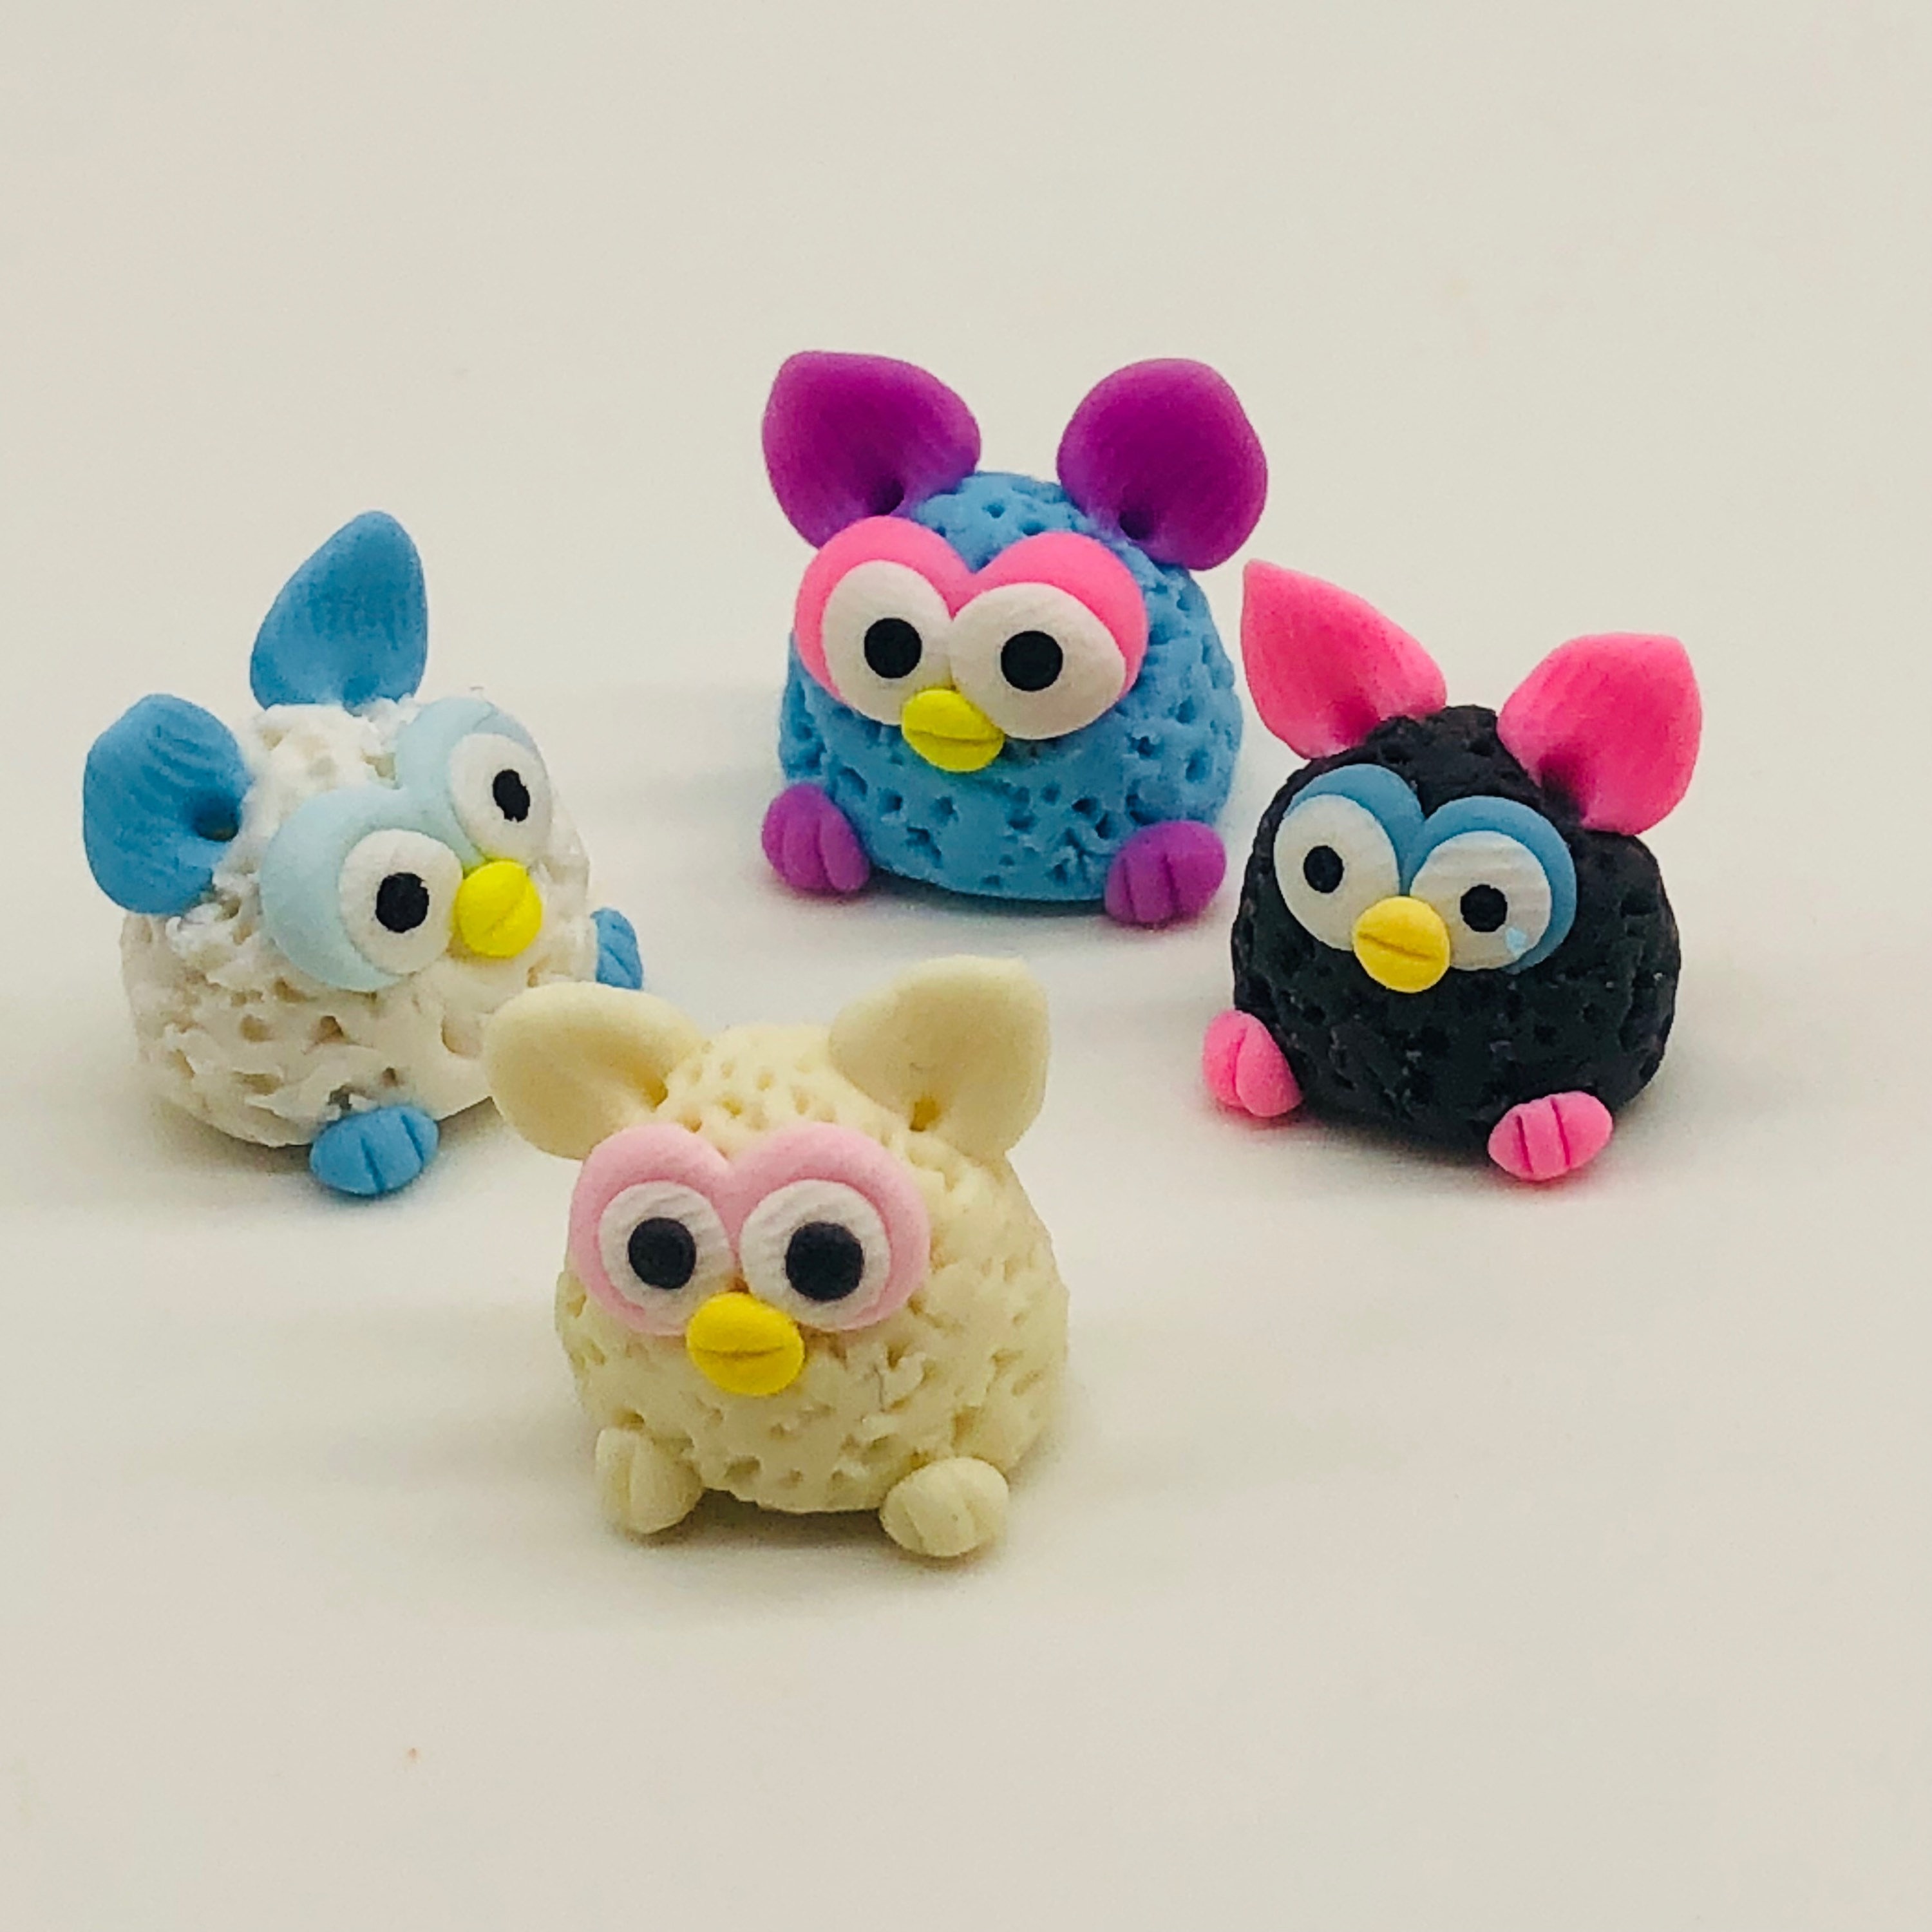 1 X Hand Made Dolls House Miniature Replica Furby Toy 1/12,  UK